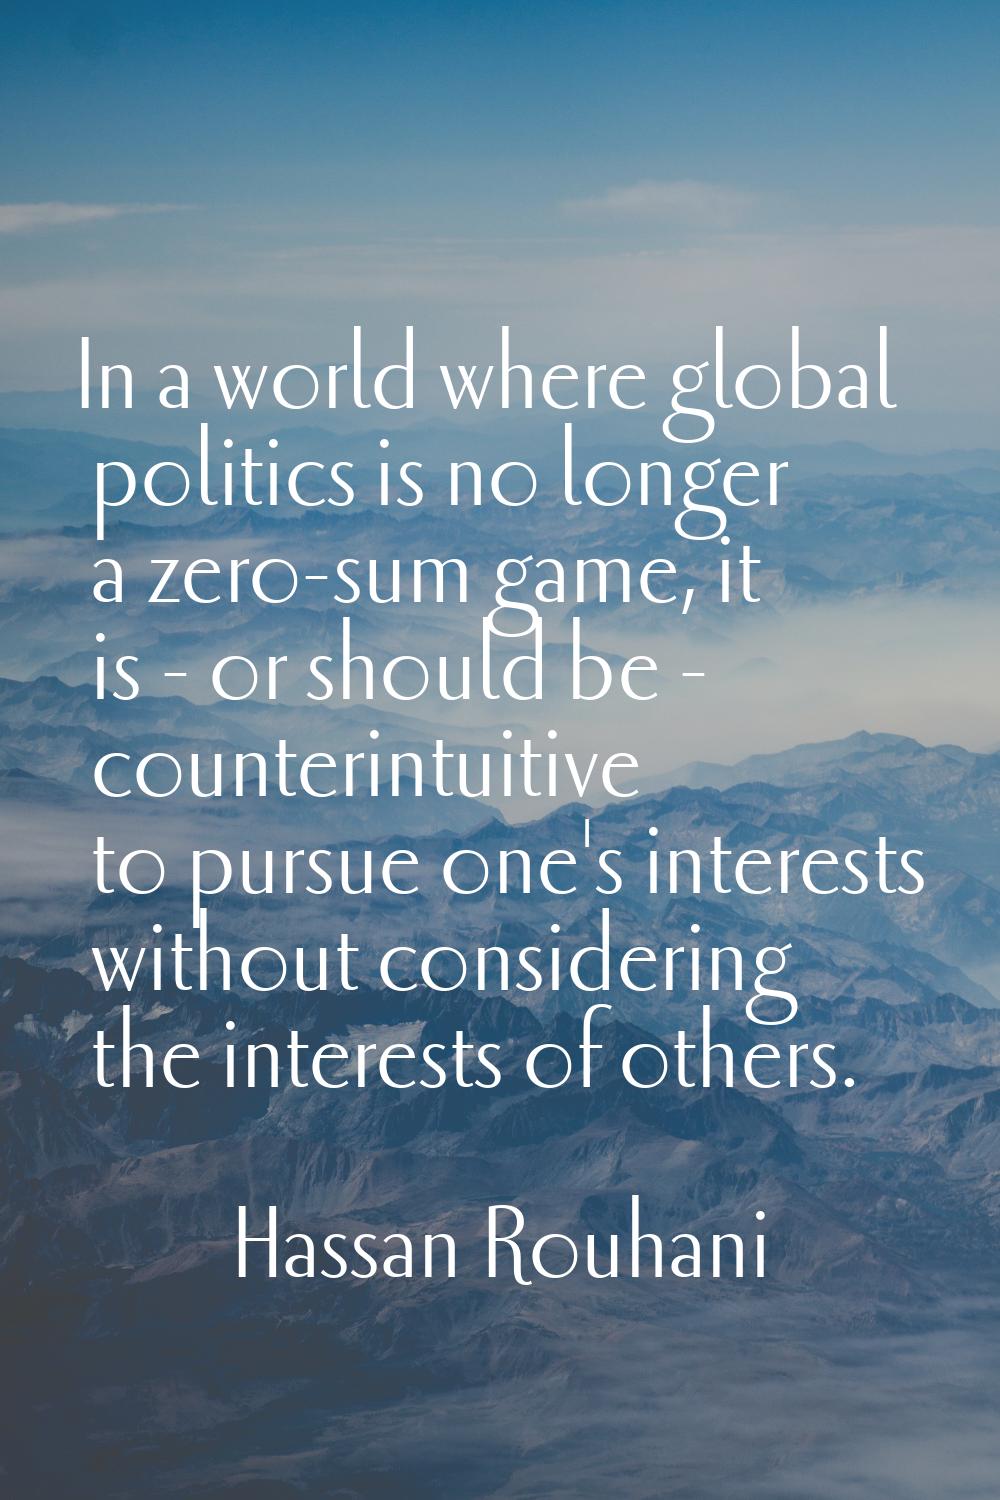 In a world where global politics is no longer a zero-sum game, it is - or should be - counterintuit